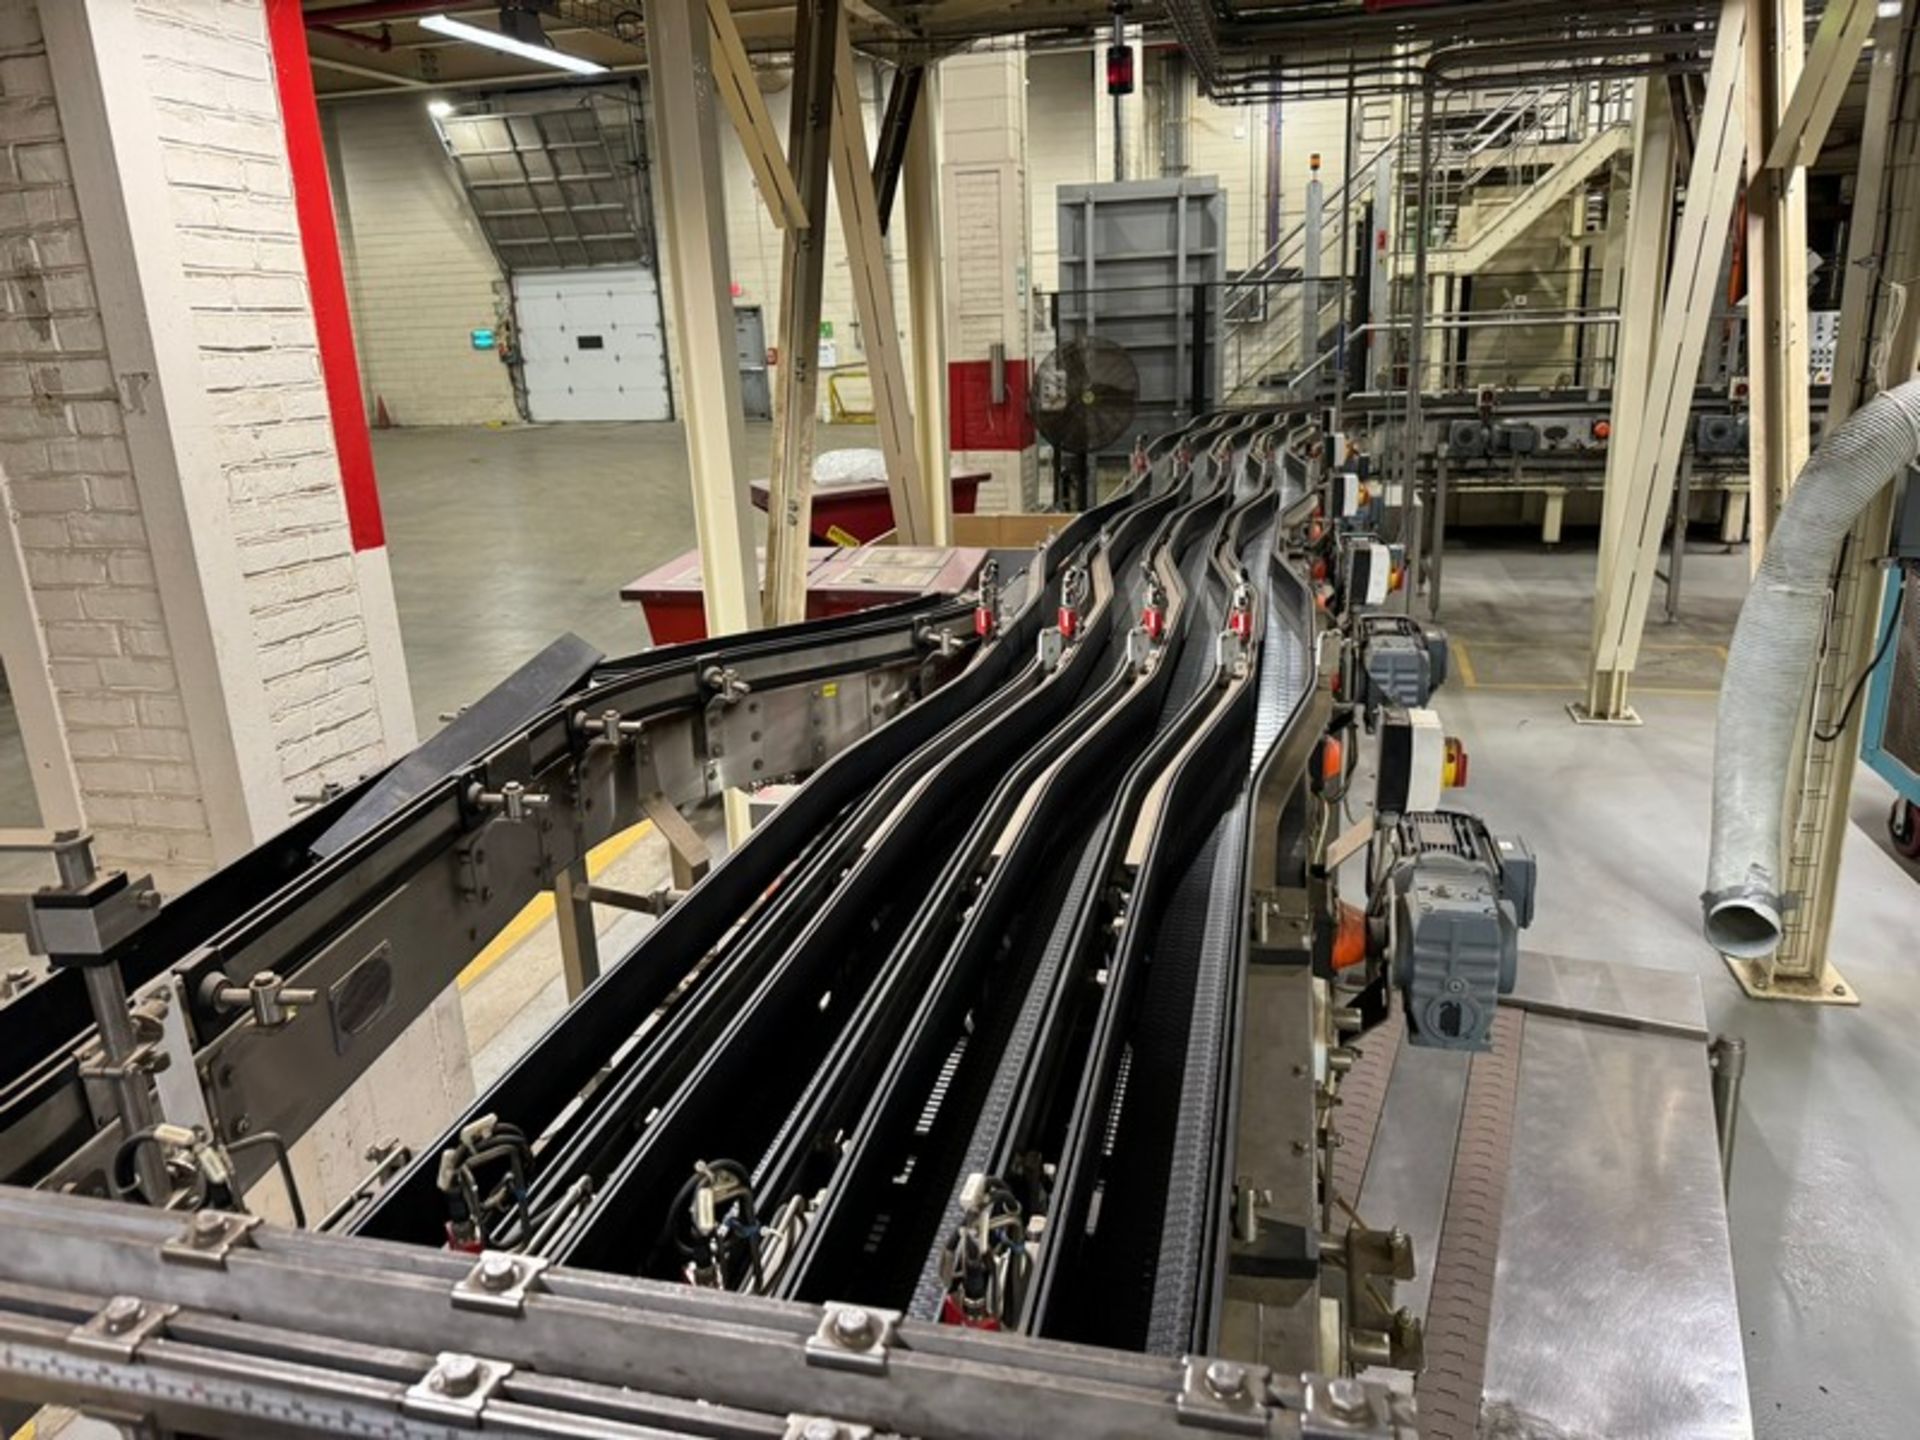 SIPAC 4-Lane Product Conveyor, with Drives & Lanes, Mounted on S/S Frame (LOCATED IN FREEHOLD, N. - Image 6 of 7